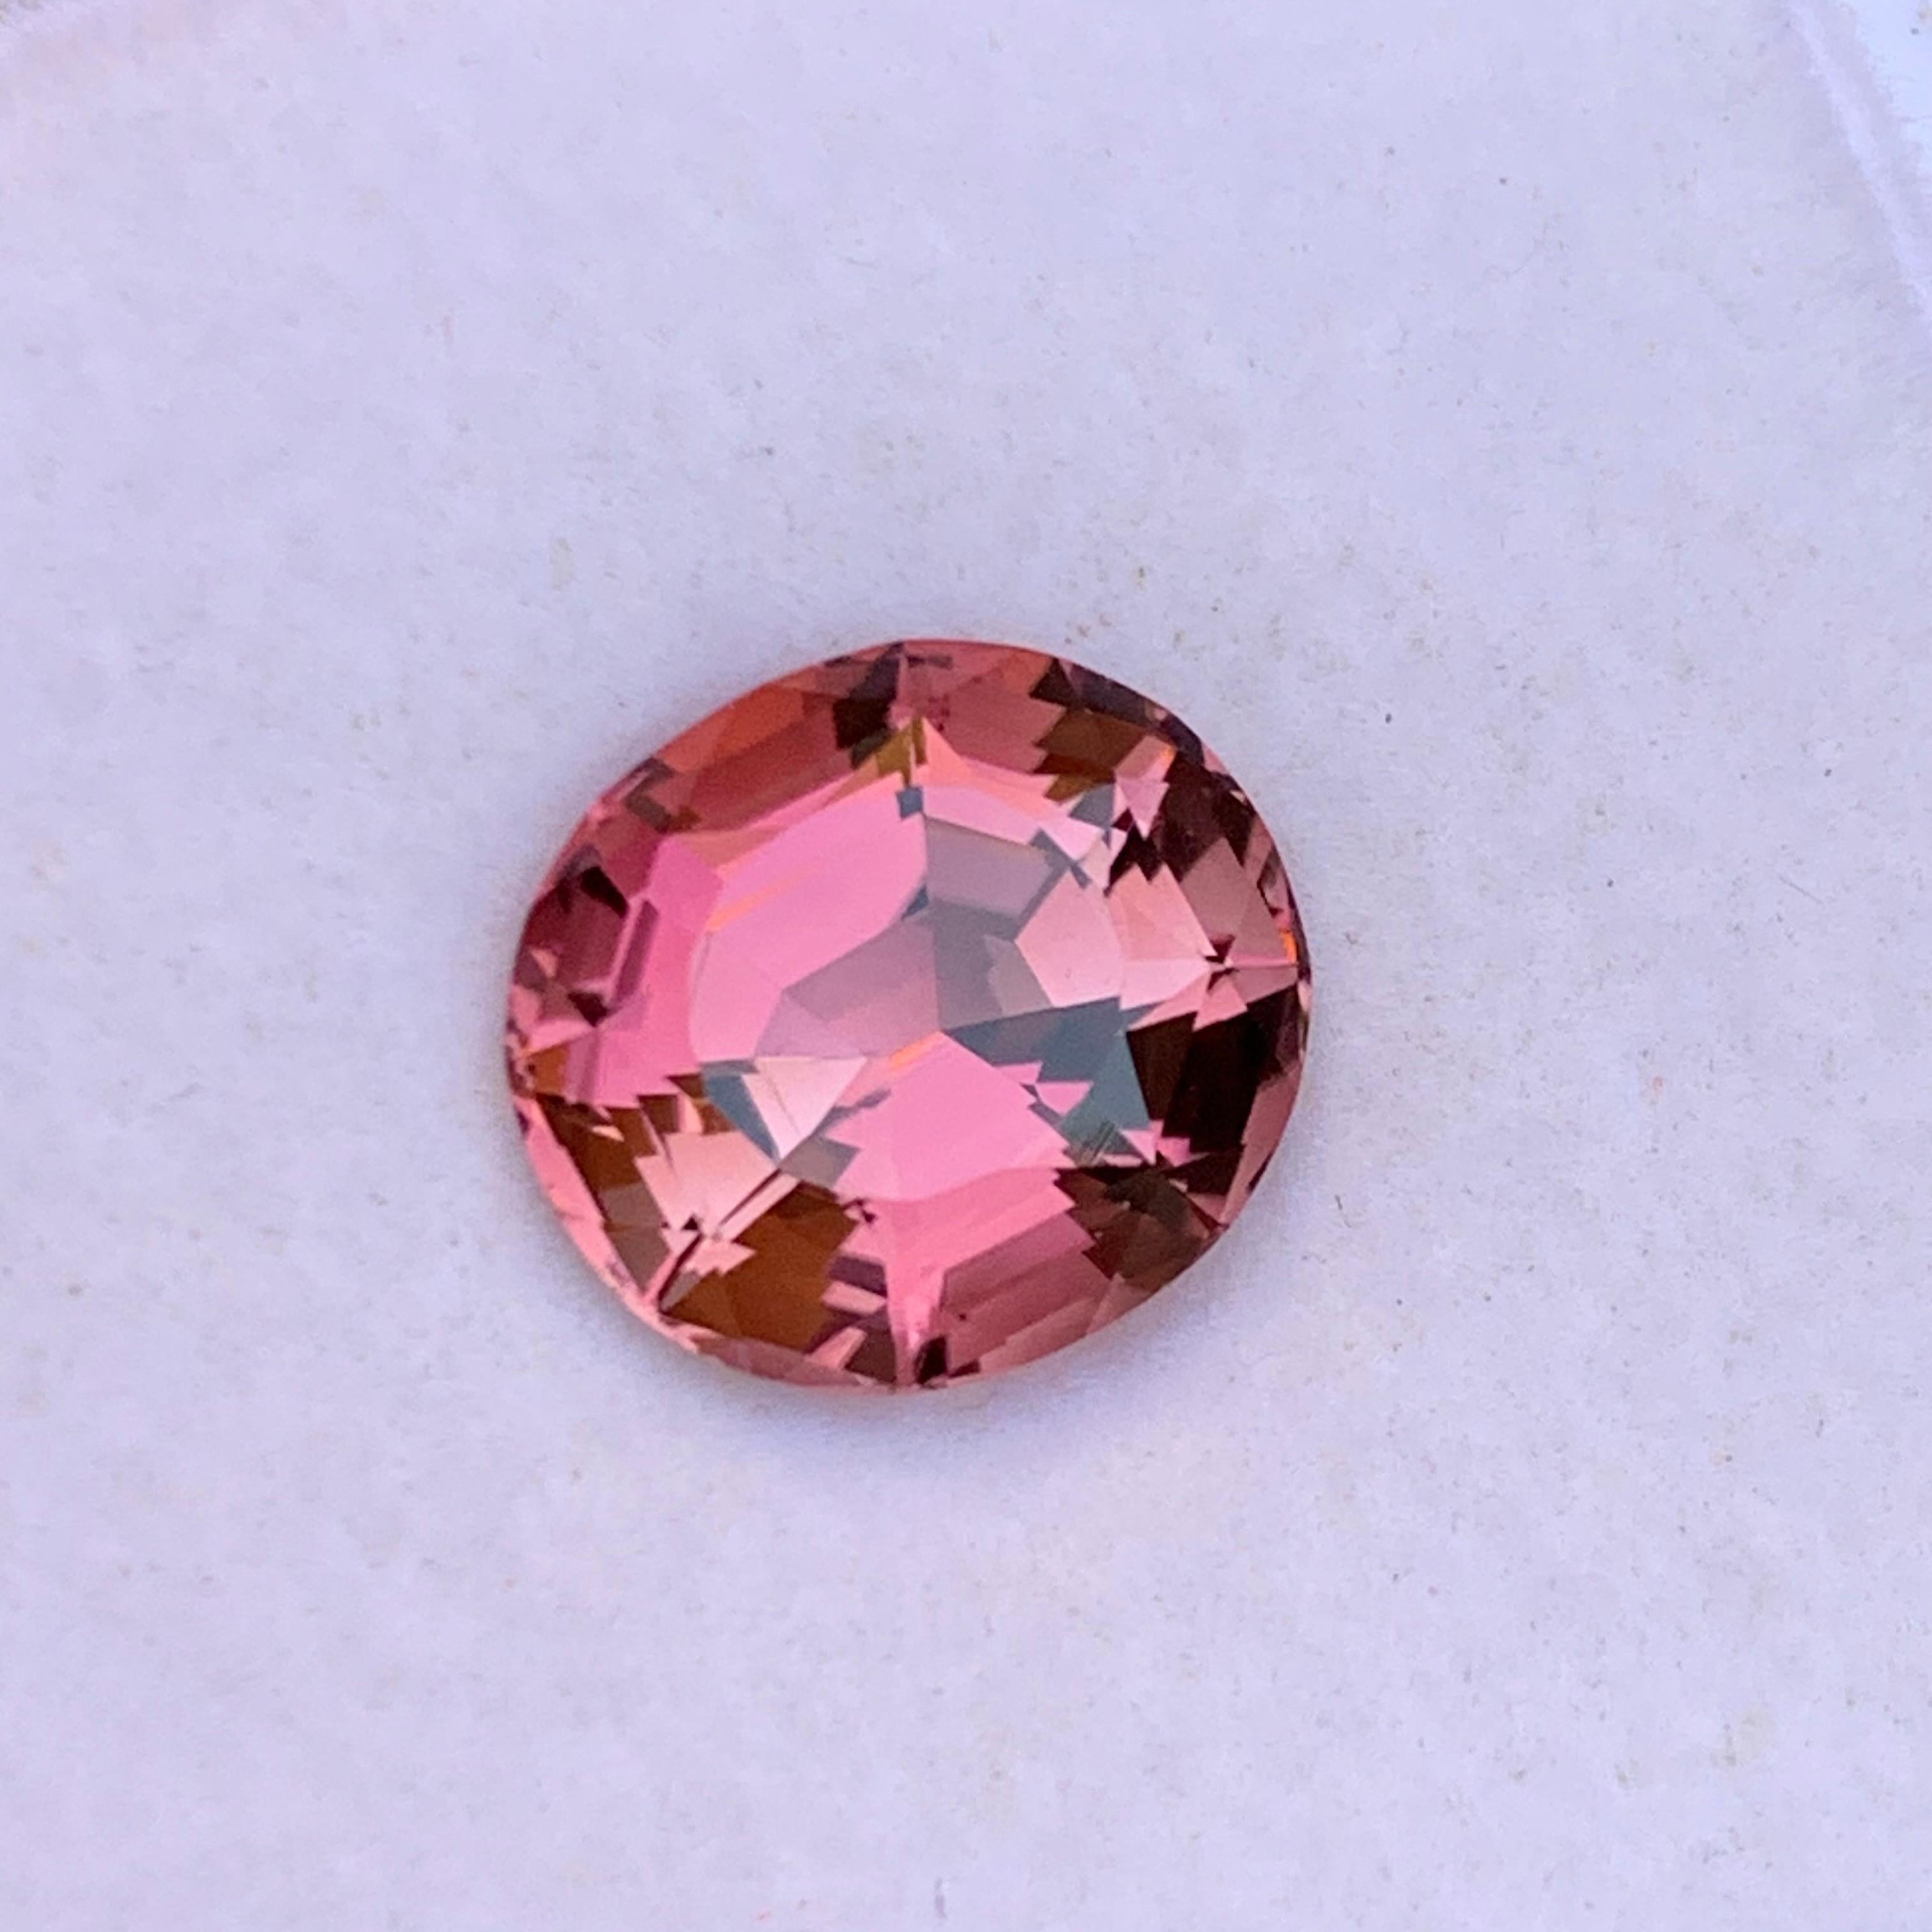 Rare Peachy Pink Natural Tourmaline Gemstone, 3.80 Ct Fancy Cushion Cut for Ring For Sale 4